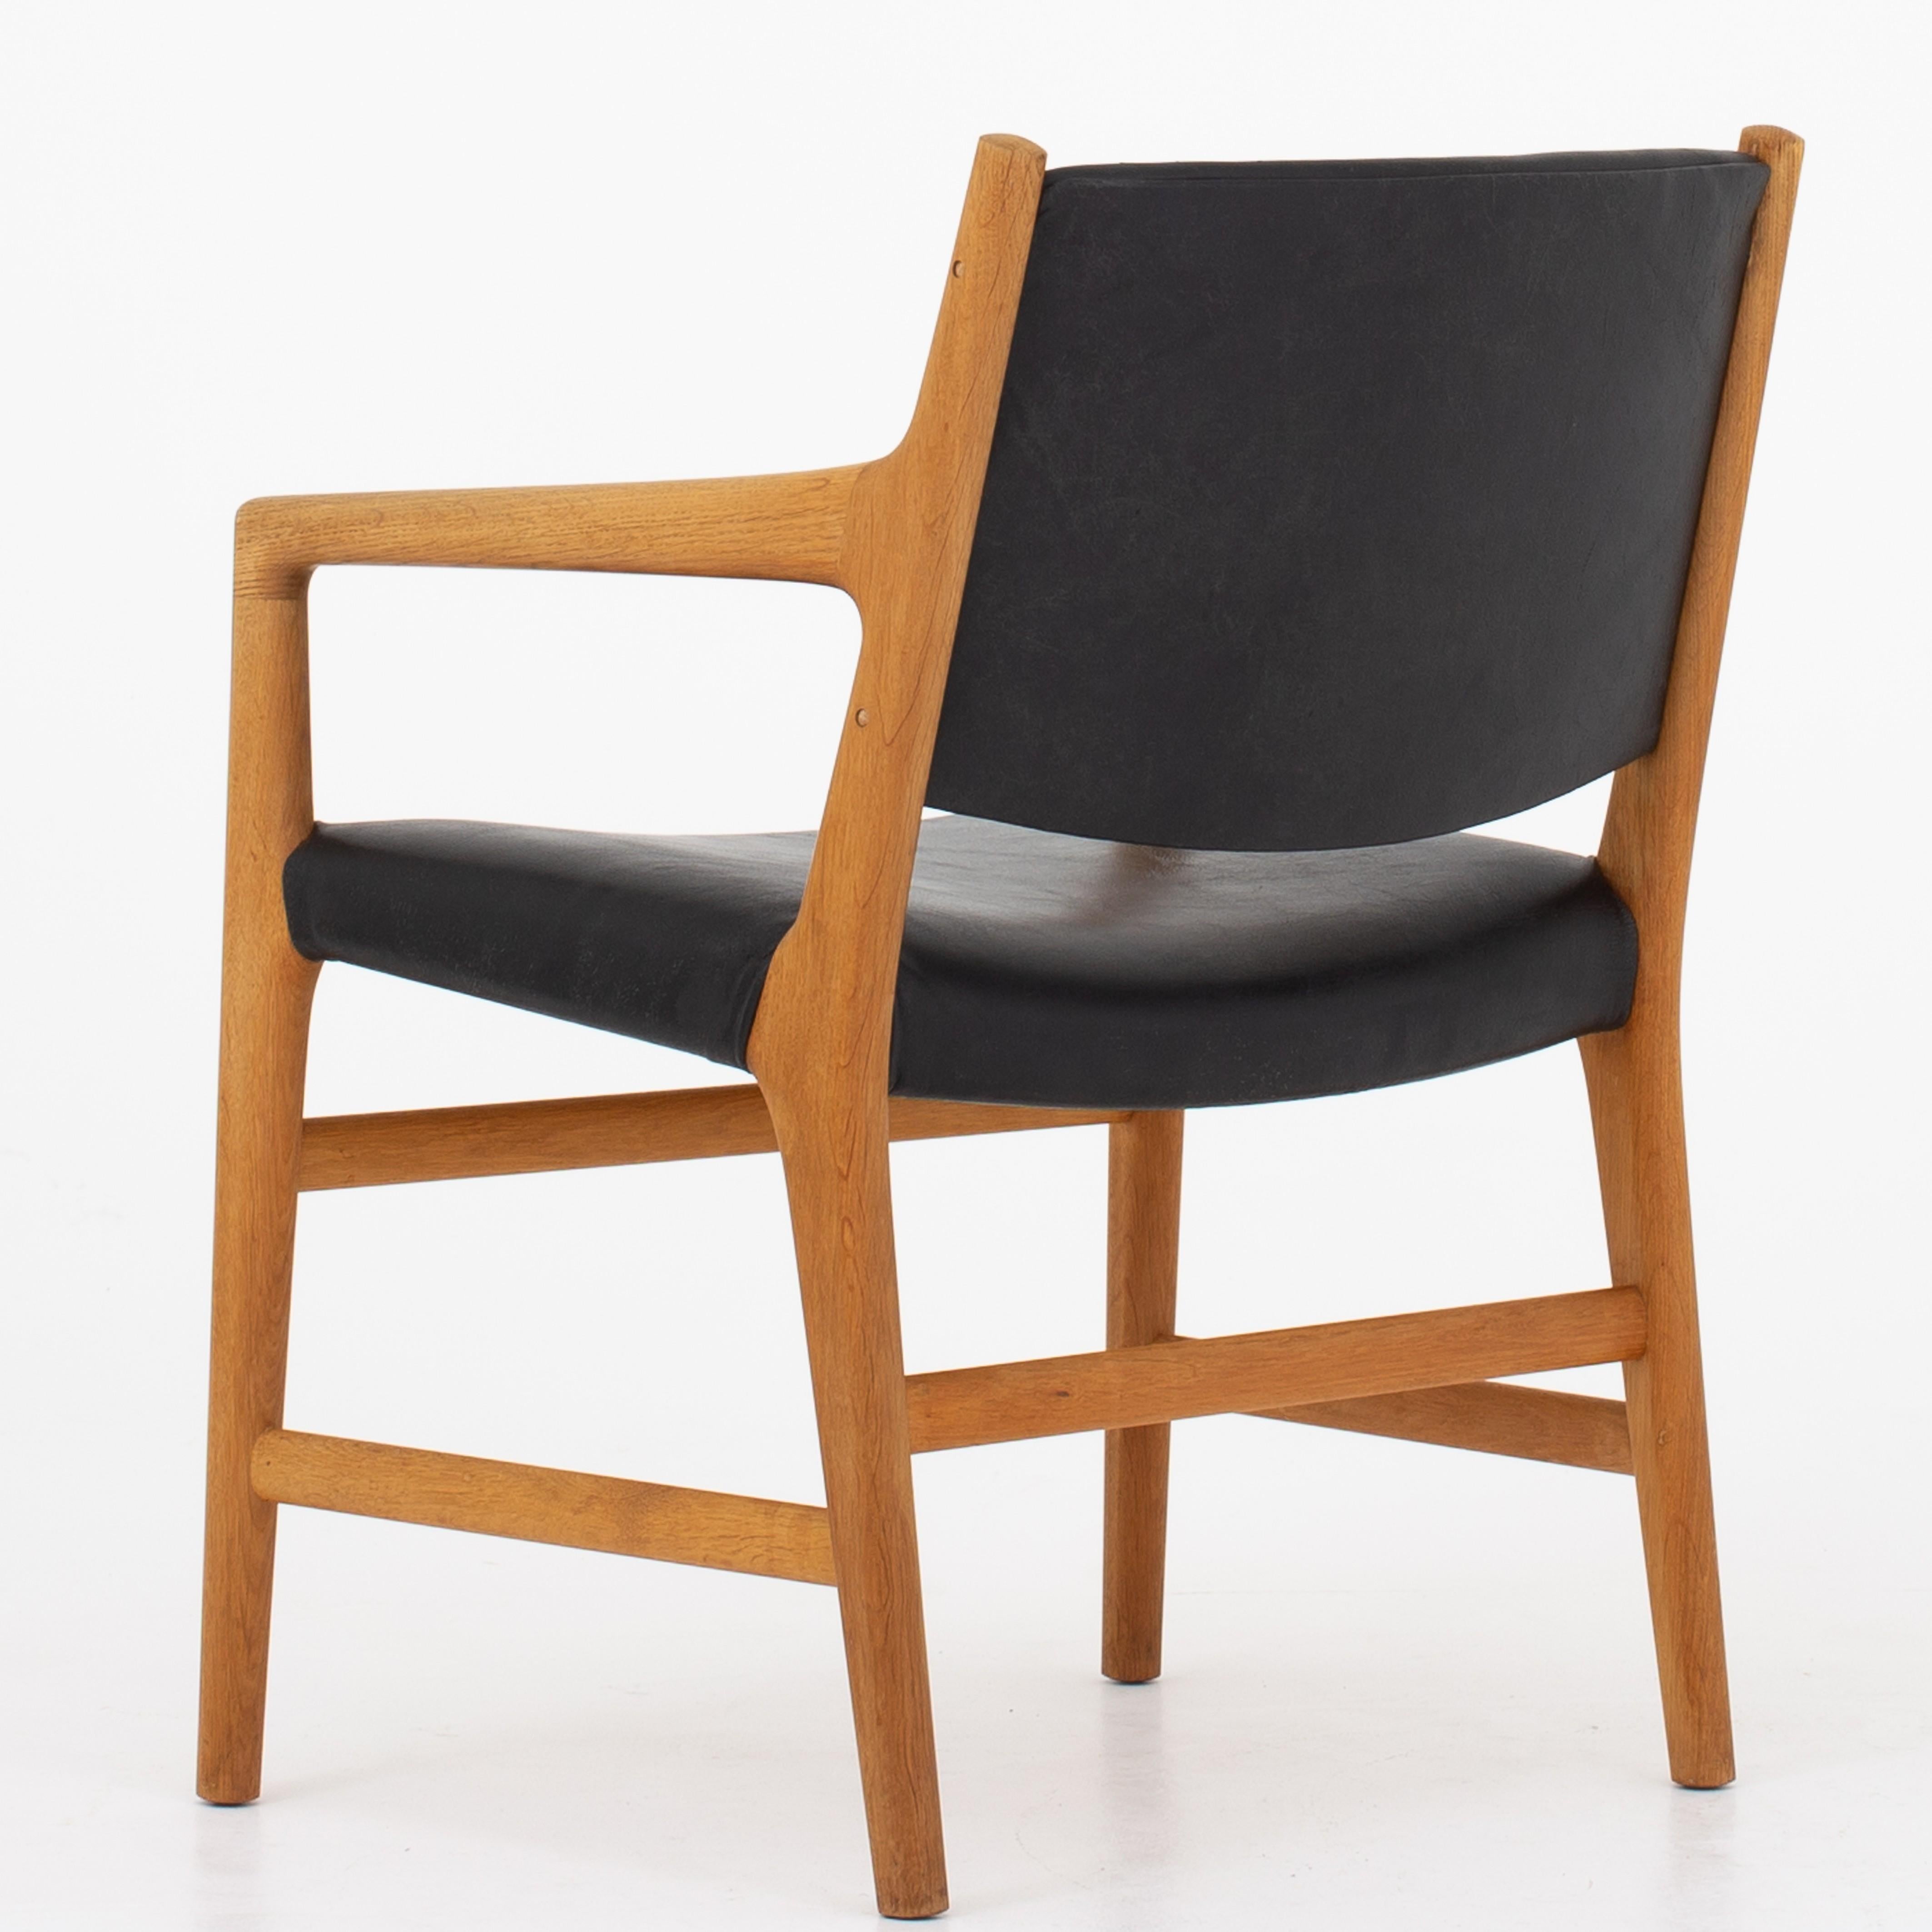 JH 507 - armchair in oak with patinated, black leather. Rare model. Maker Johannes Hansen.